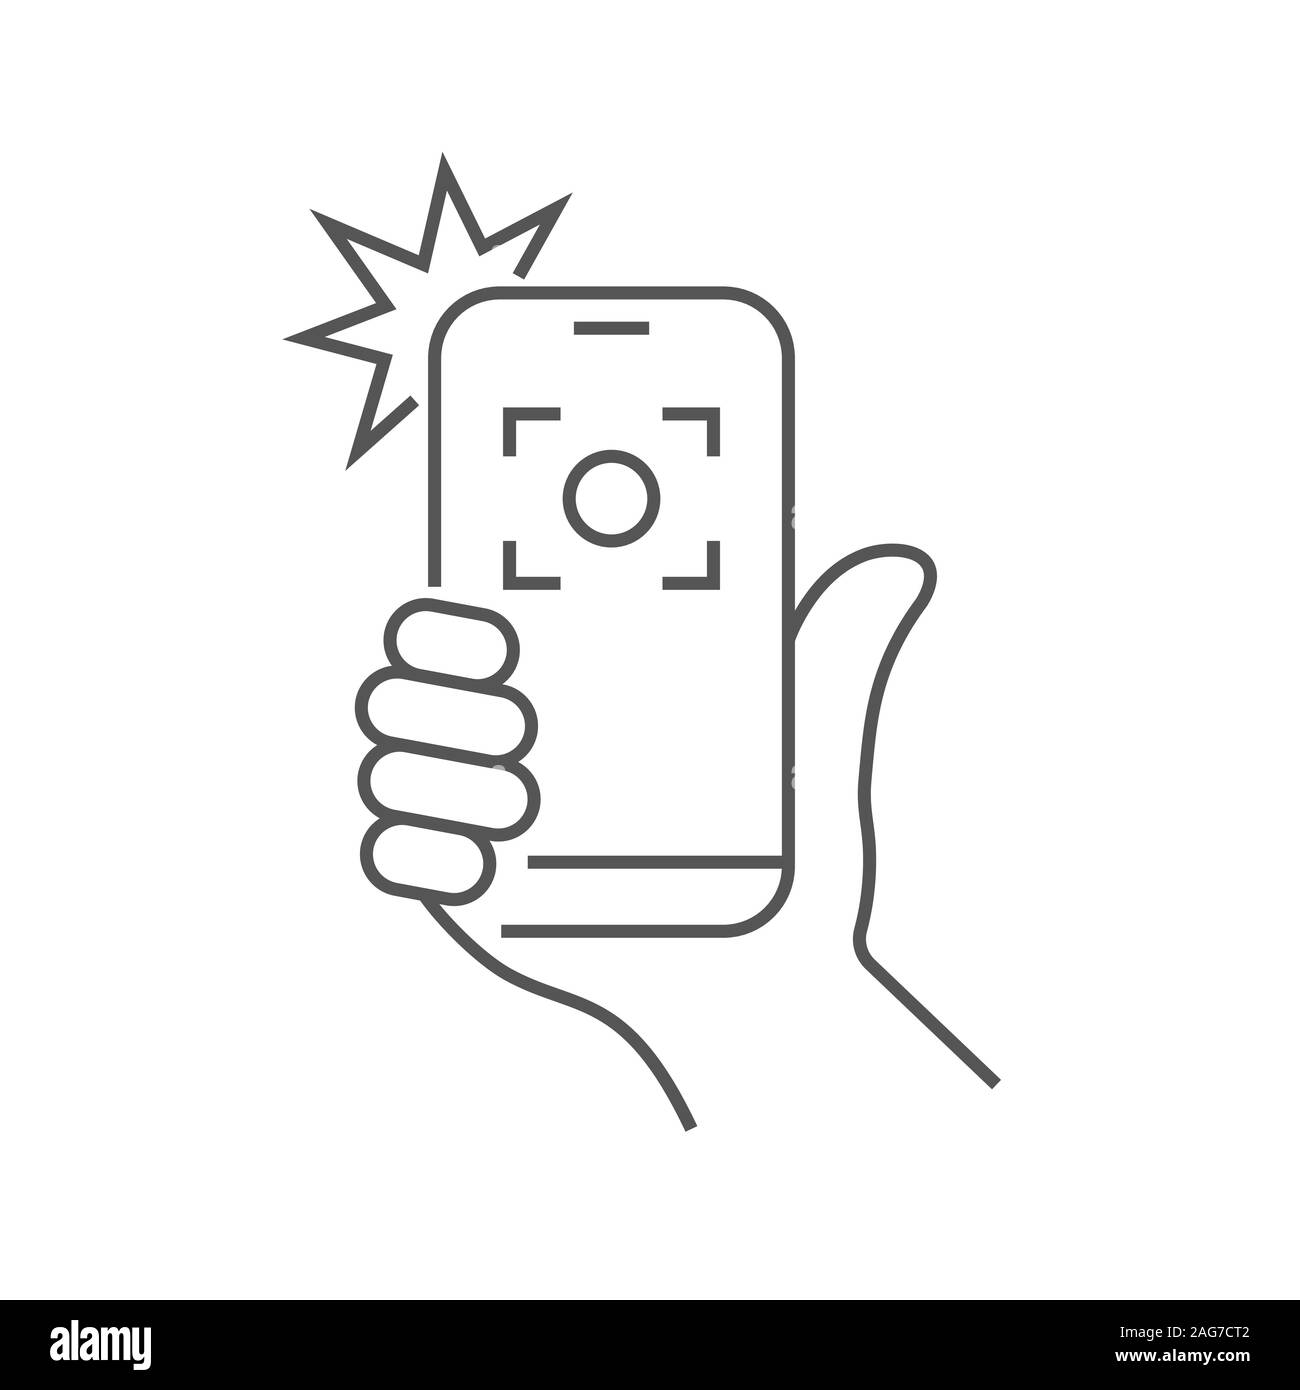 Taking selfie on smartphone concept creative icon selfie label. Hand holding smartphone linear icon. Thin line illustration. Smart phone photocamera. Stock Vector